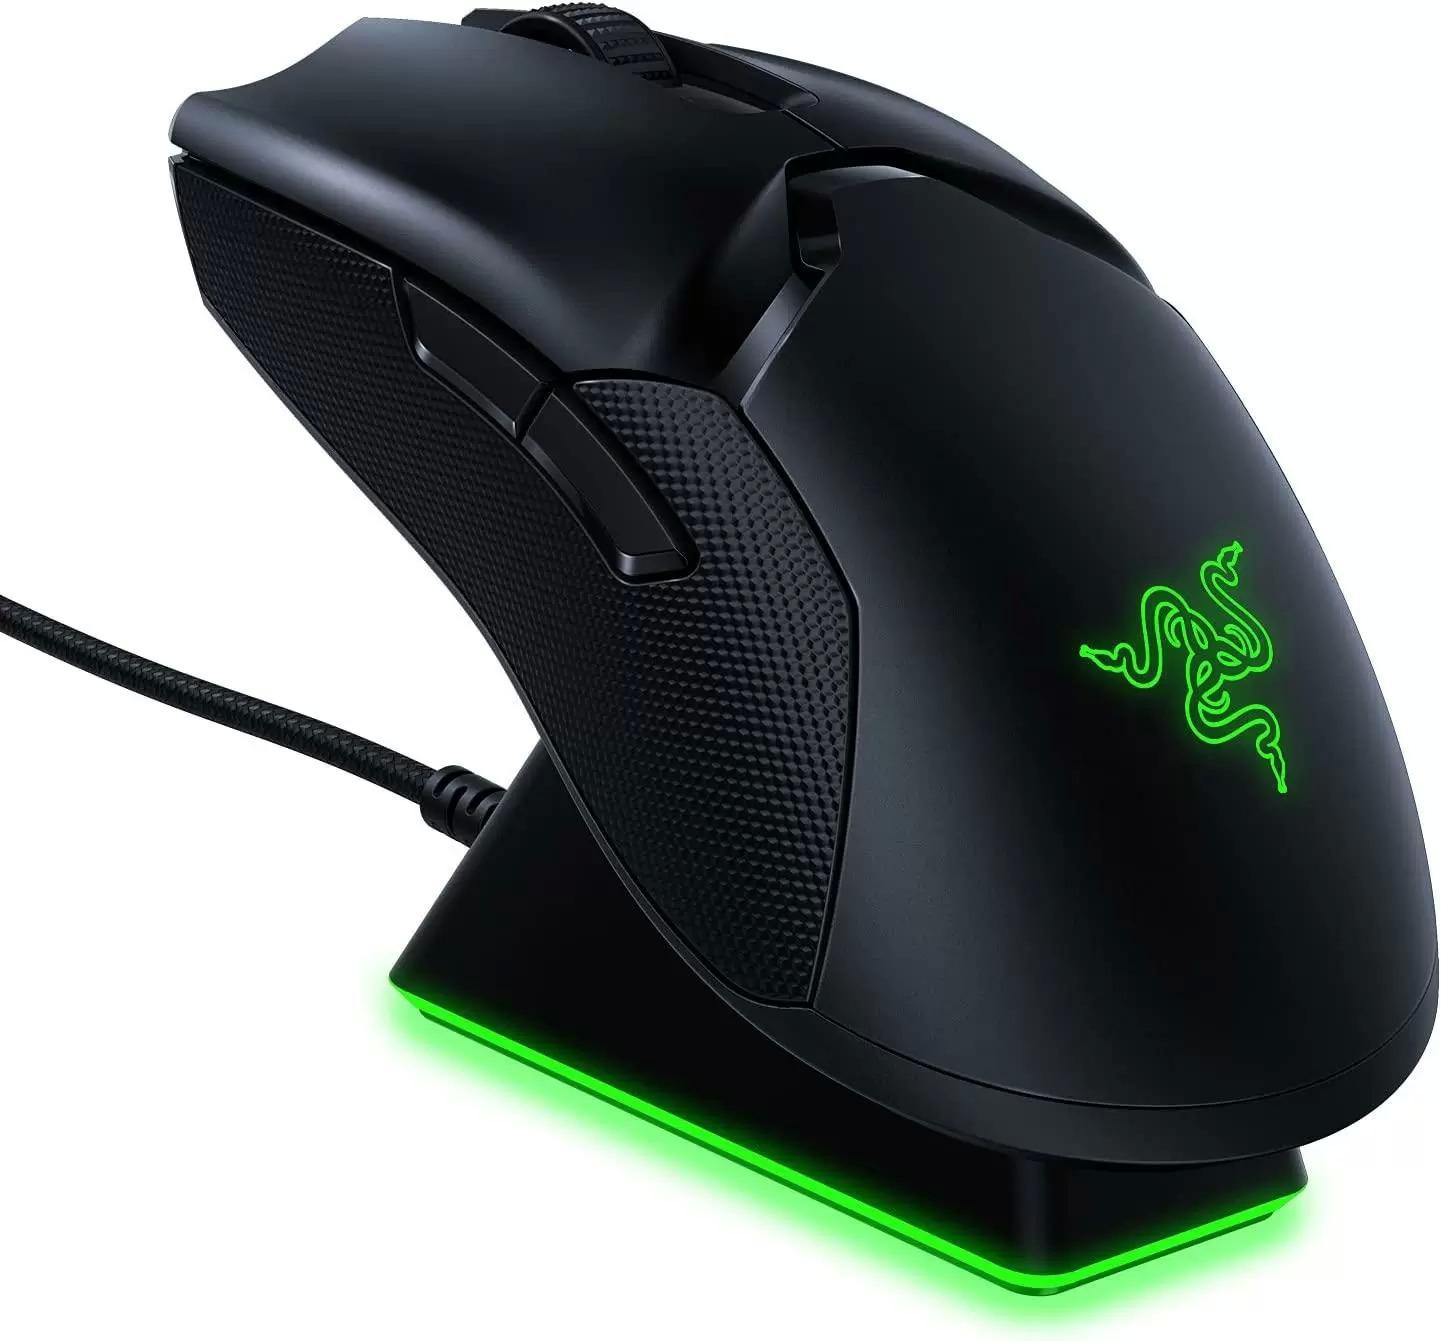 Razer Viper Ultimate Wireless Gaming Mouse for $54.99 Shipped